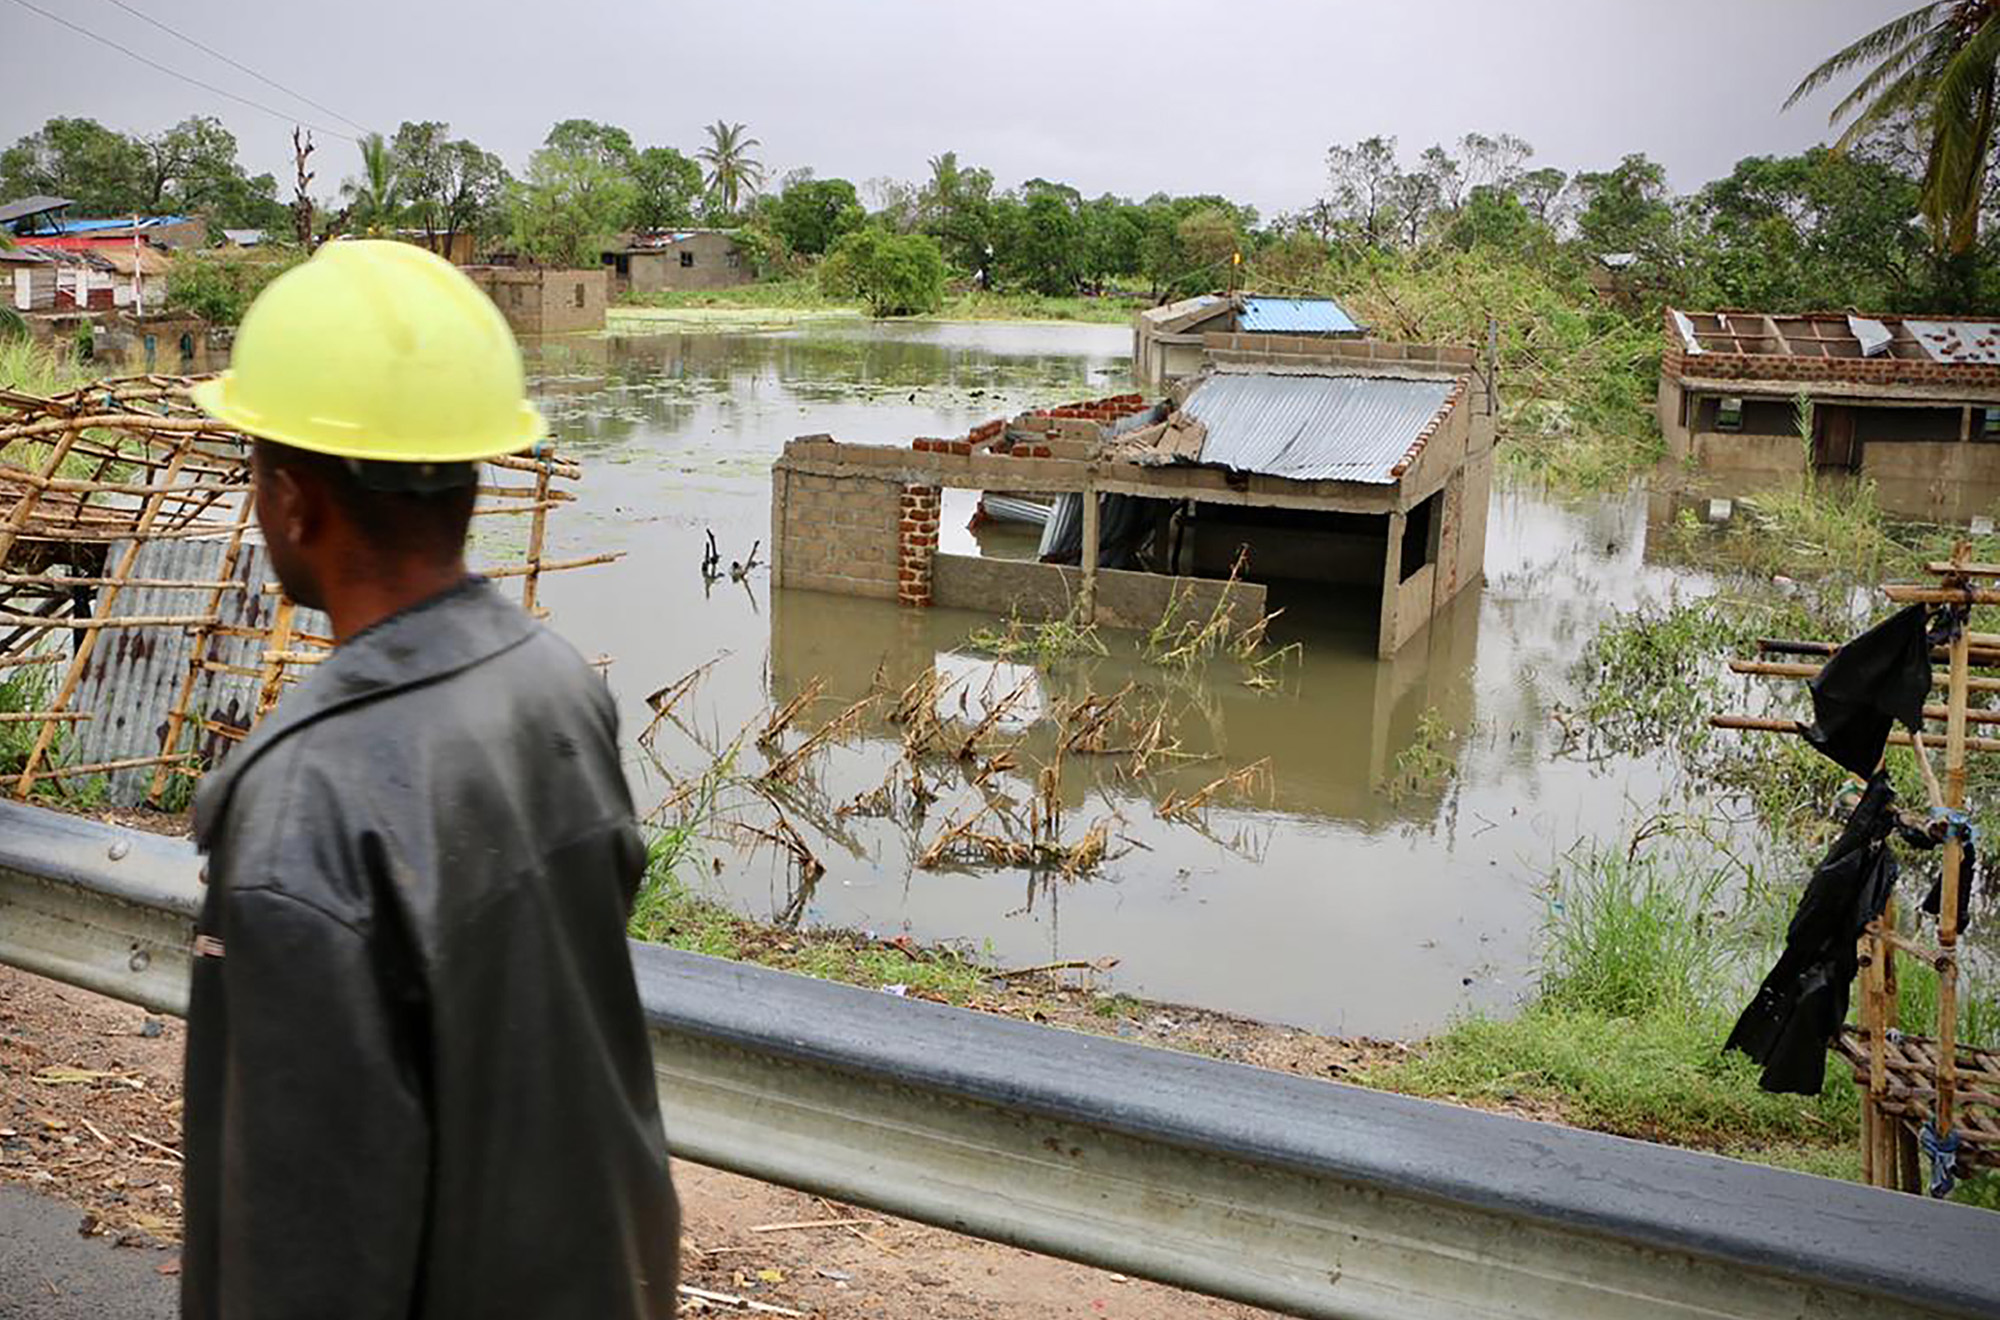 Mozambicans Rescued From Trees as Deadly Floodwaters Rise Bloomberg